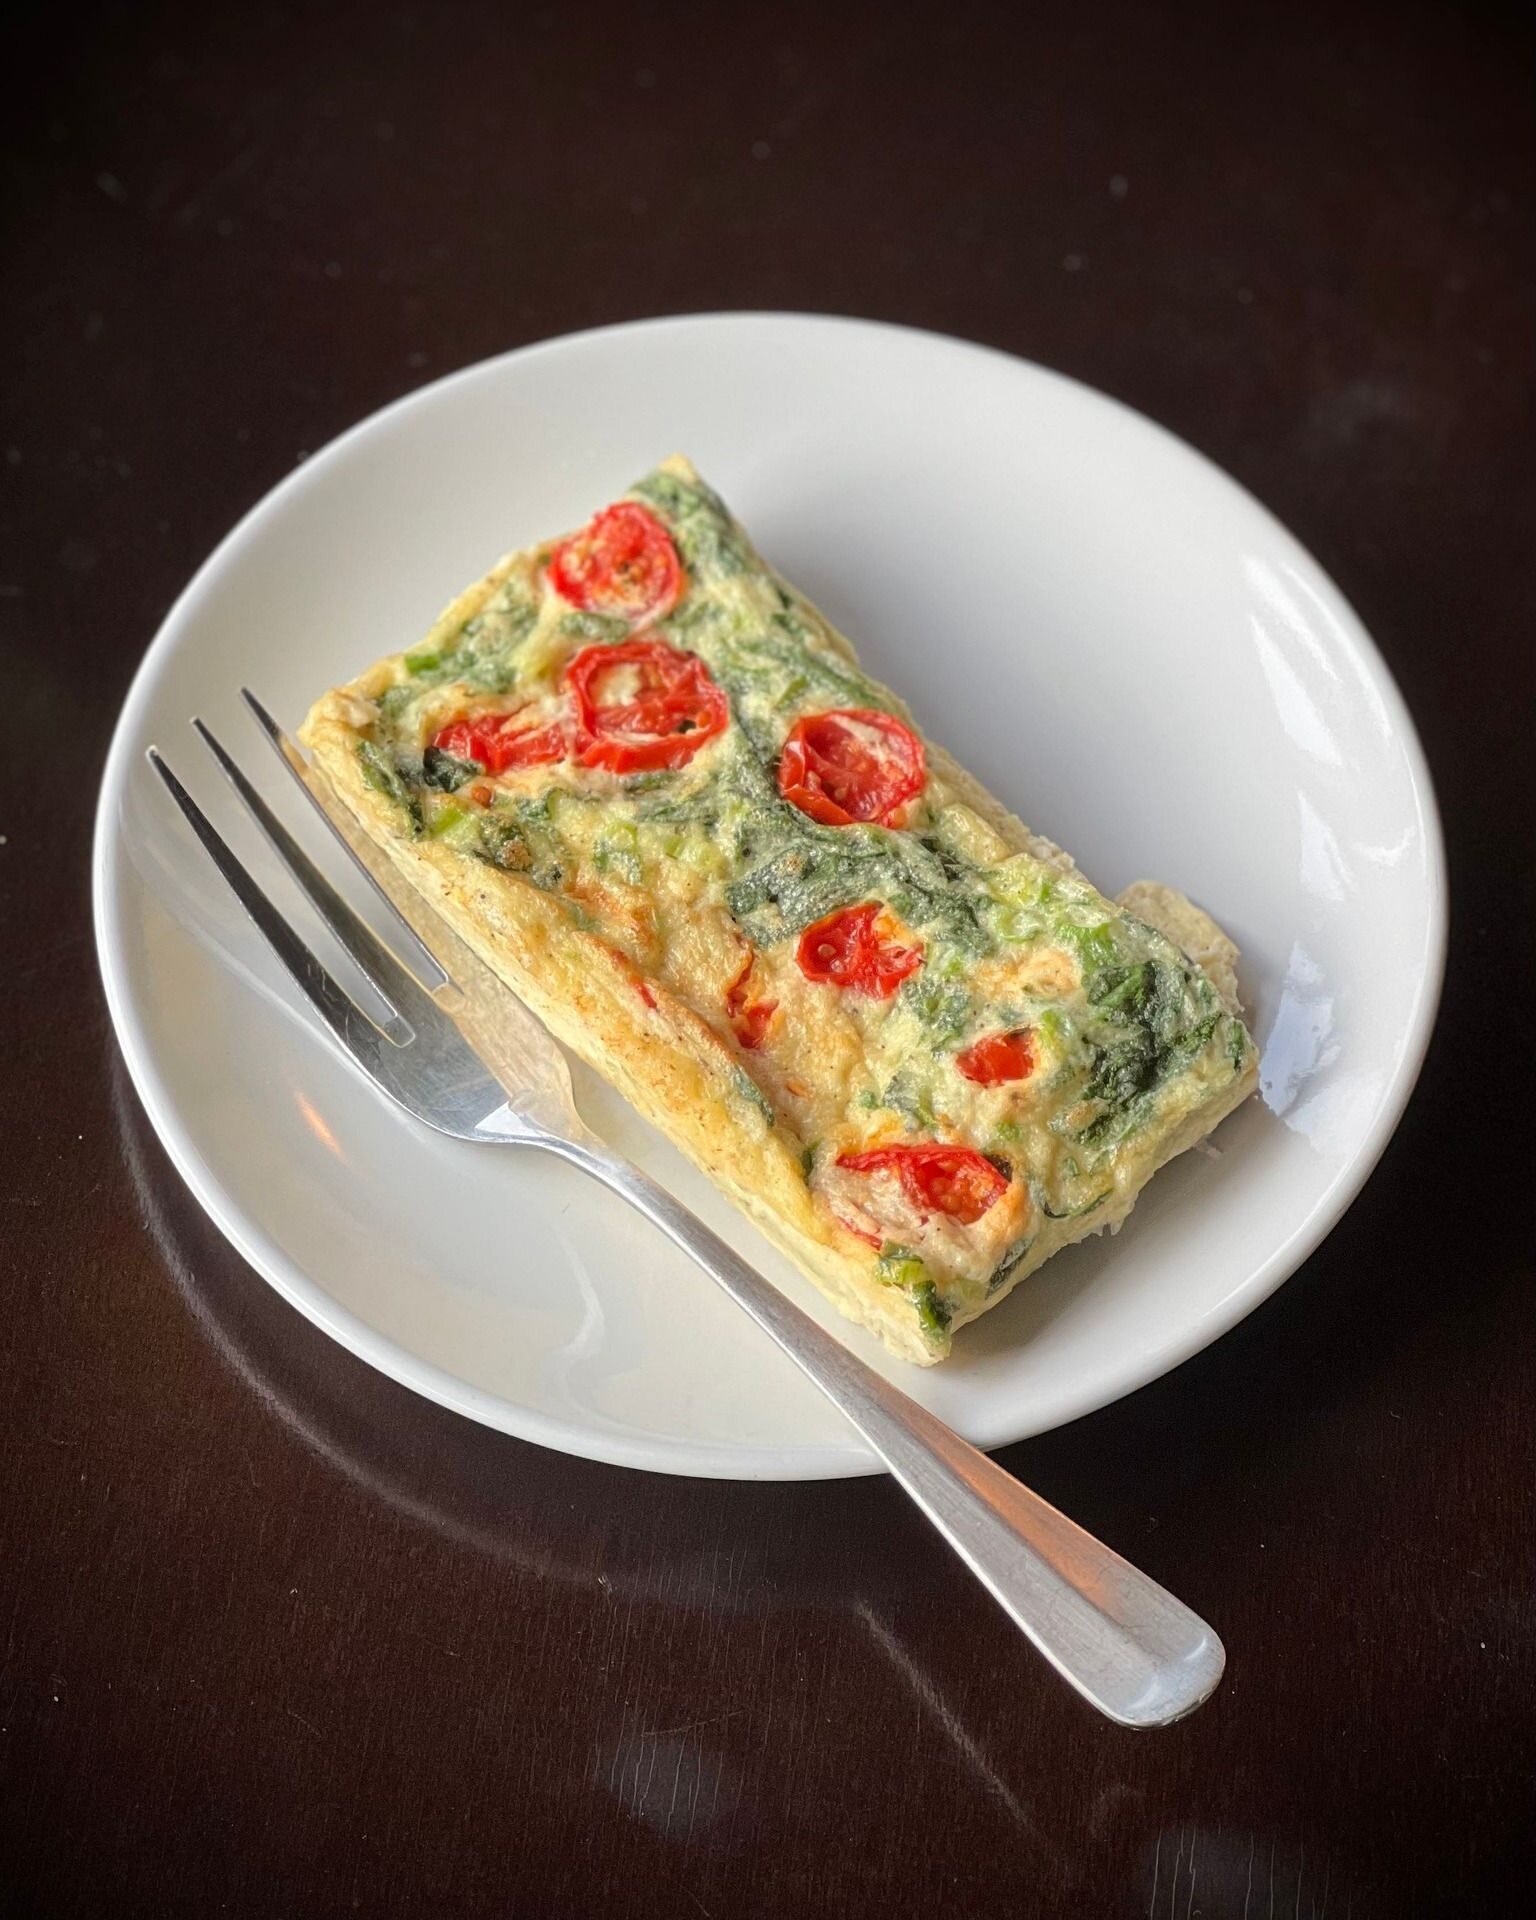 The Veggie Quiche Bite is back by popular demand! ⭐️

A mouthwatering version of our crustless quiche that brings together the delightful flavors of earthy spinach, sweet cherry tomatoes, and savory Swiss cheese. 

It's a winner and it's now availabl